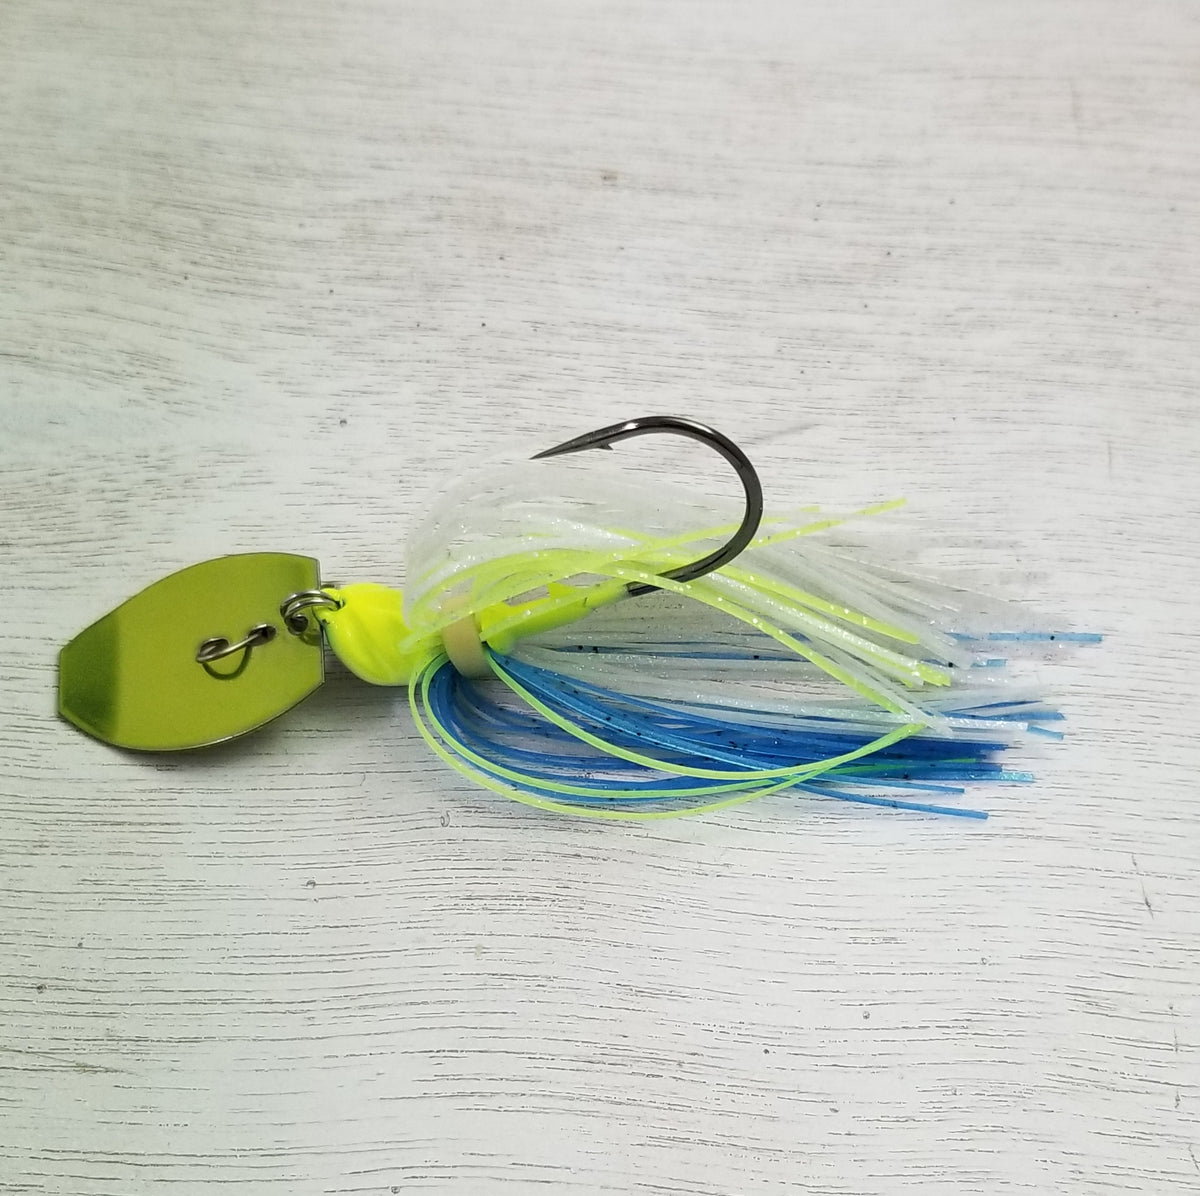 Delta Lures Thunder Jig - Lime blade - Delta shad